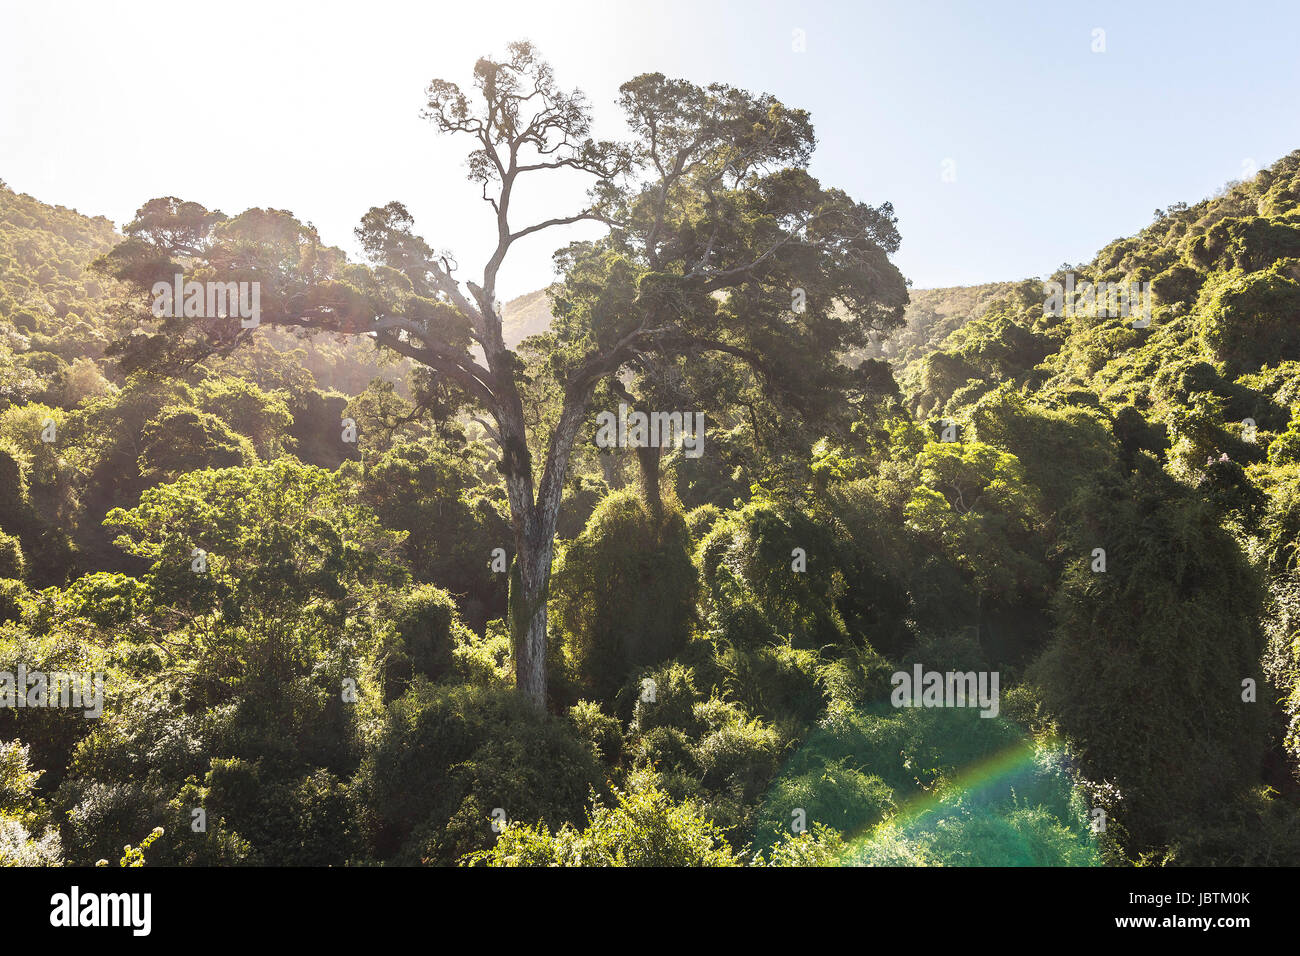 Yellowwood tree in Nature's valley in South Africa Stock Photo